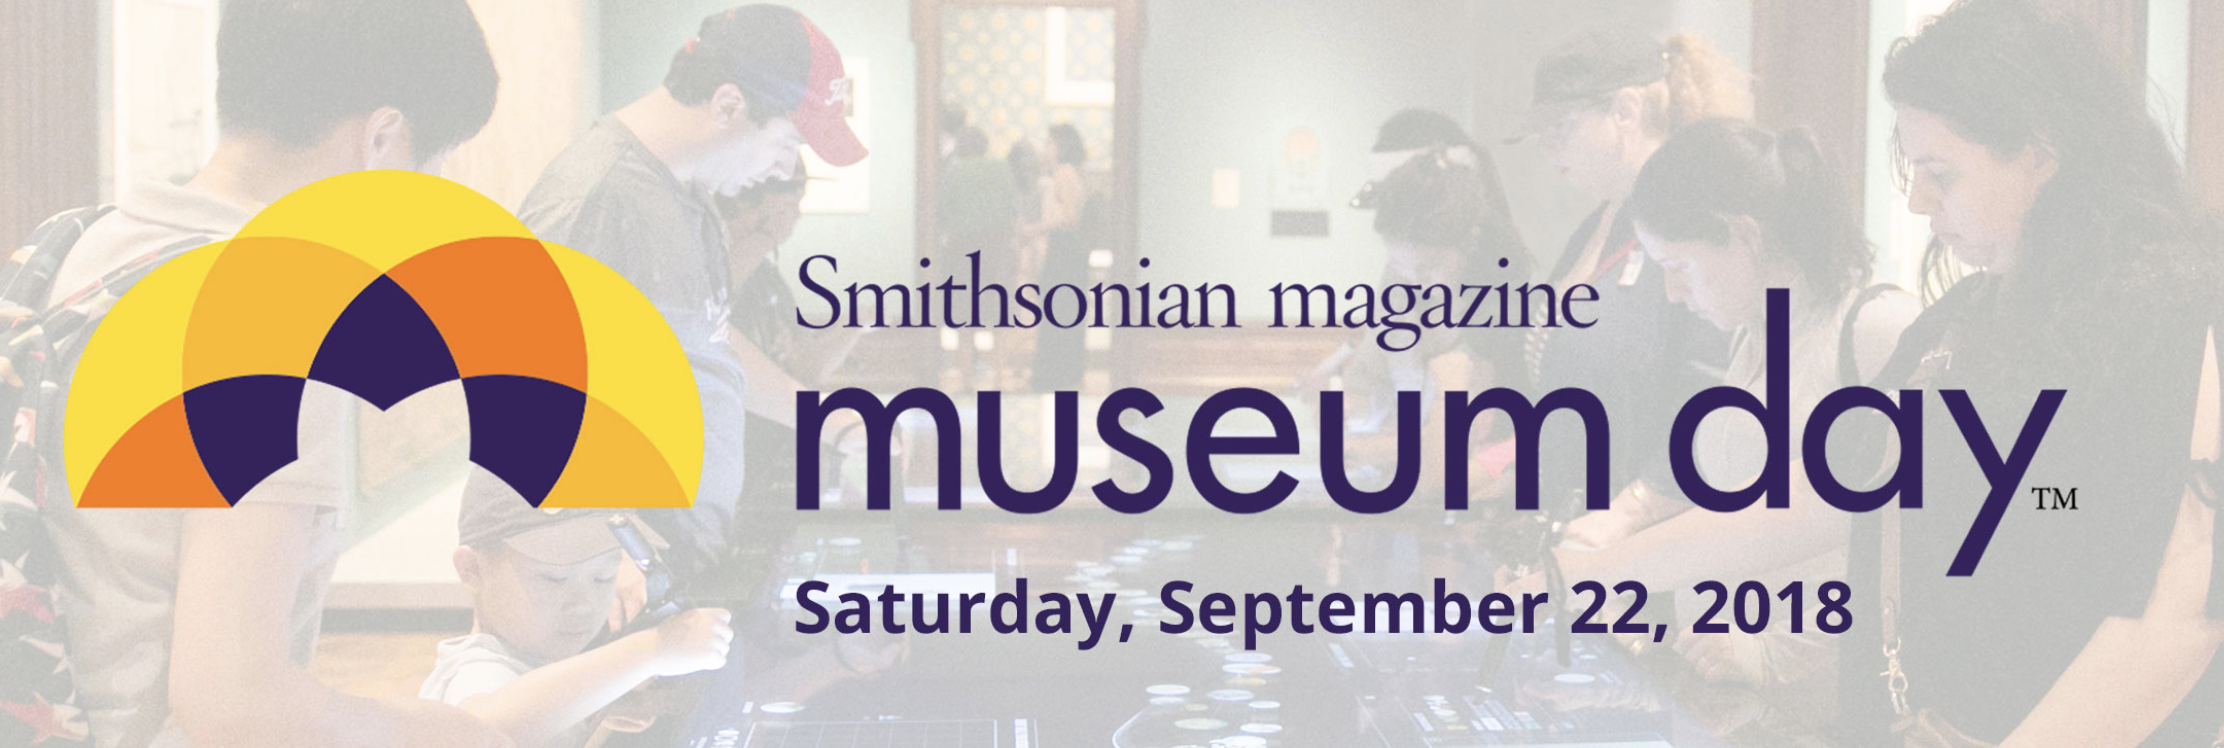 Free Admission Tickets via Smithsonian Magazine's Museum Day The